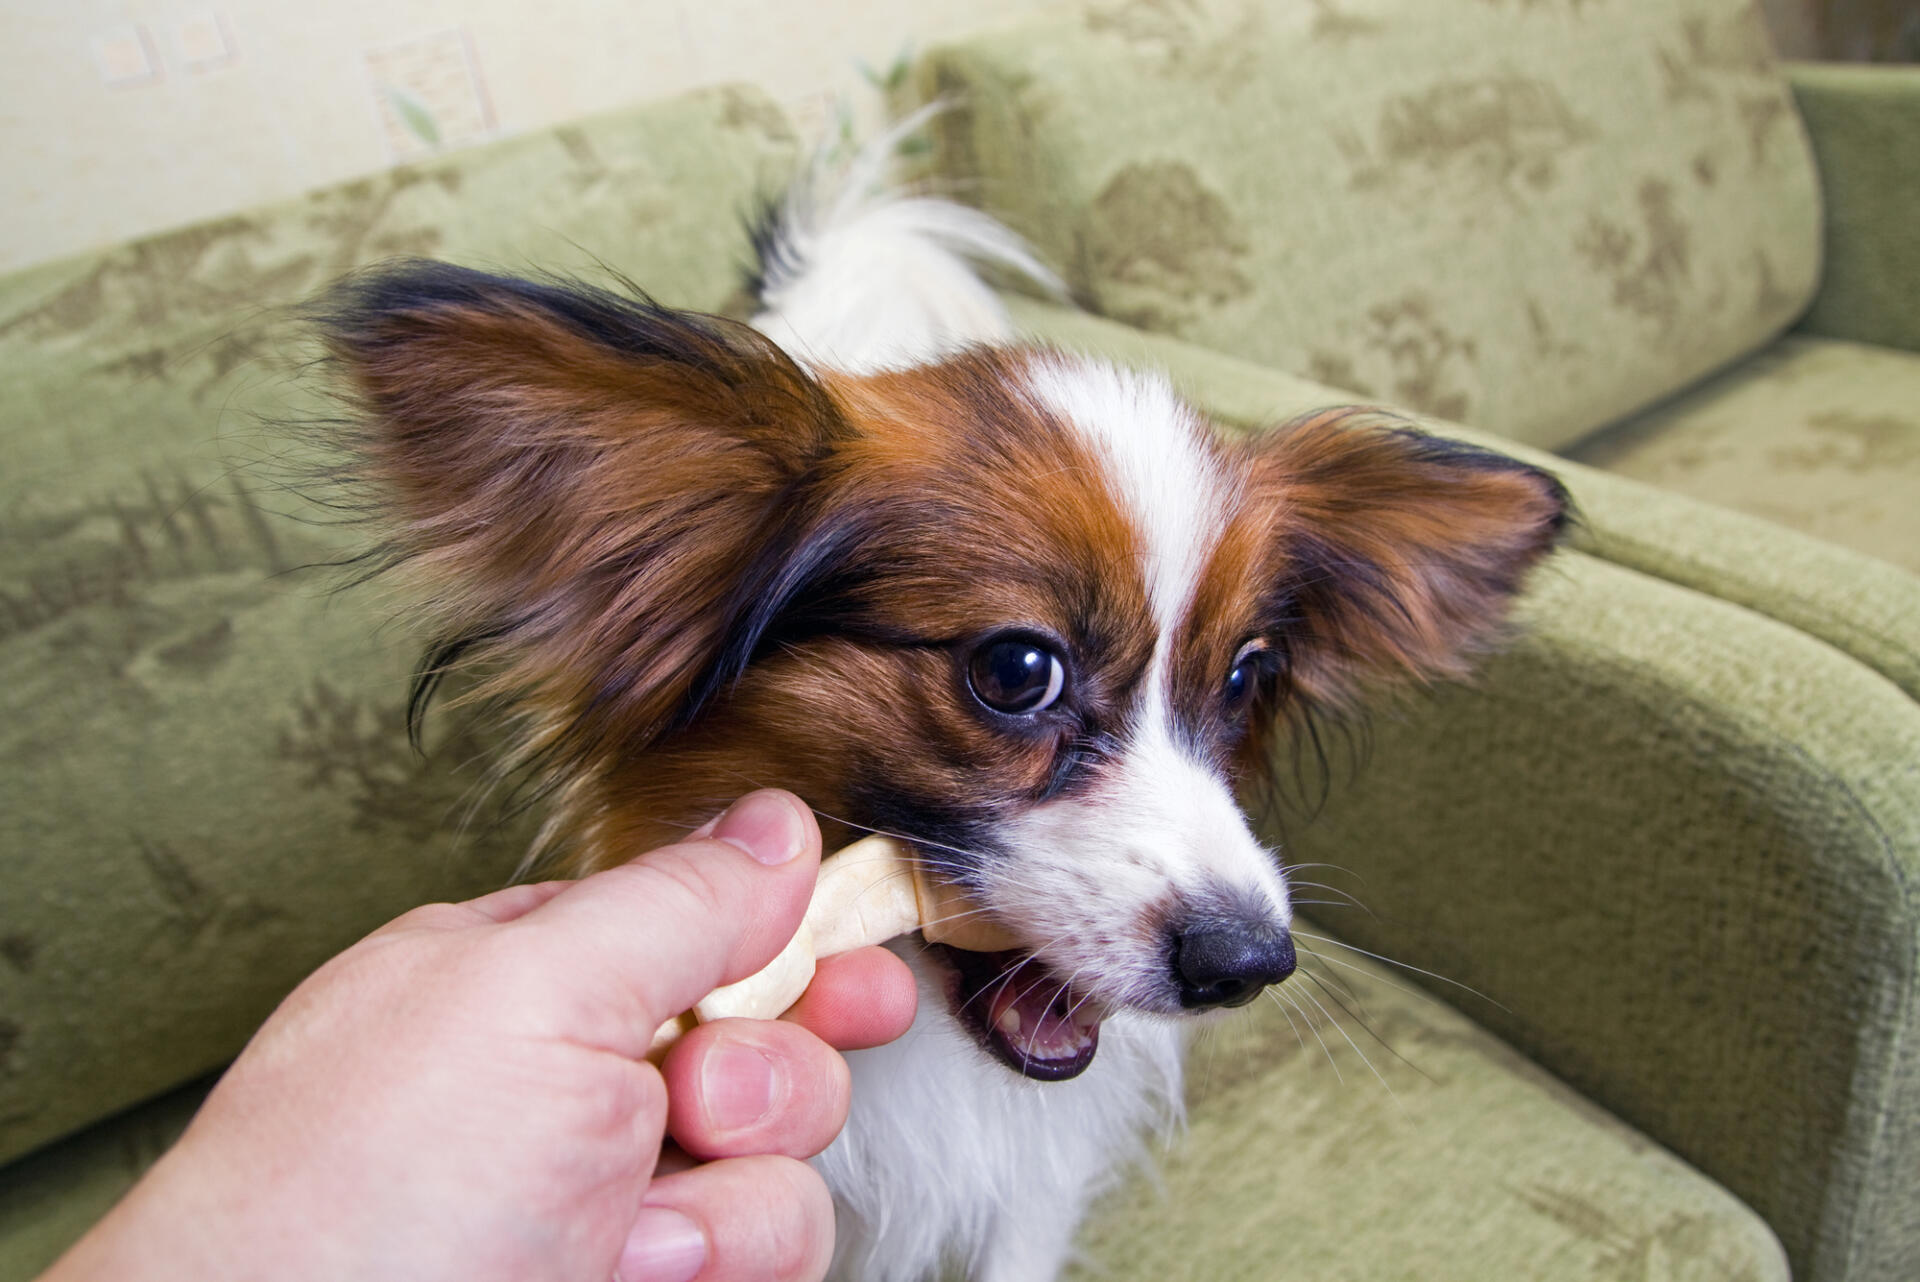 Treats to give your dog